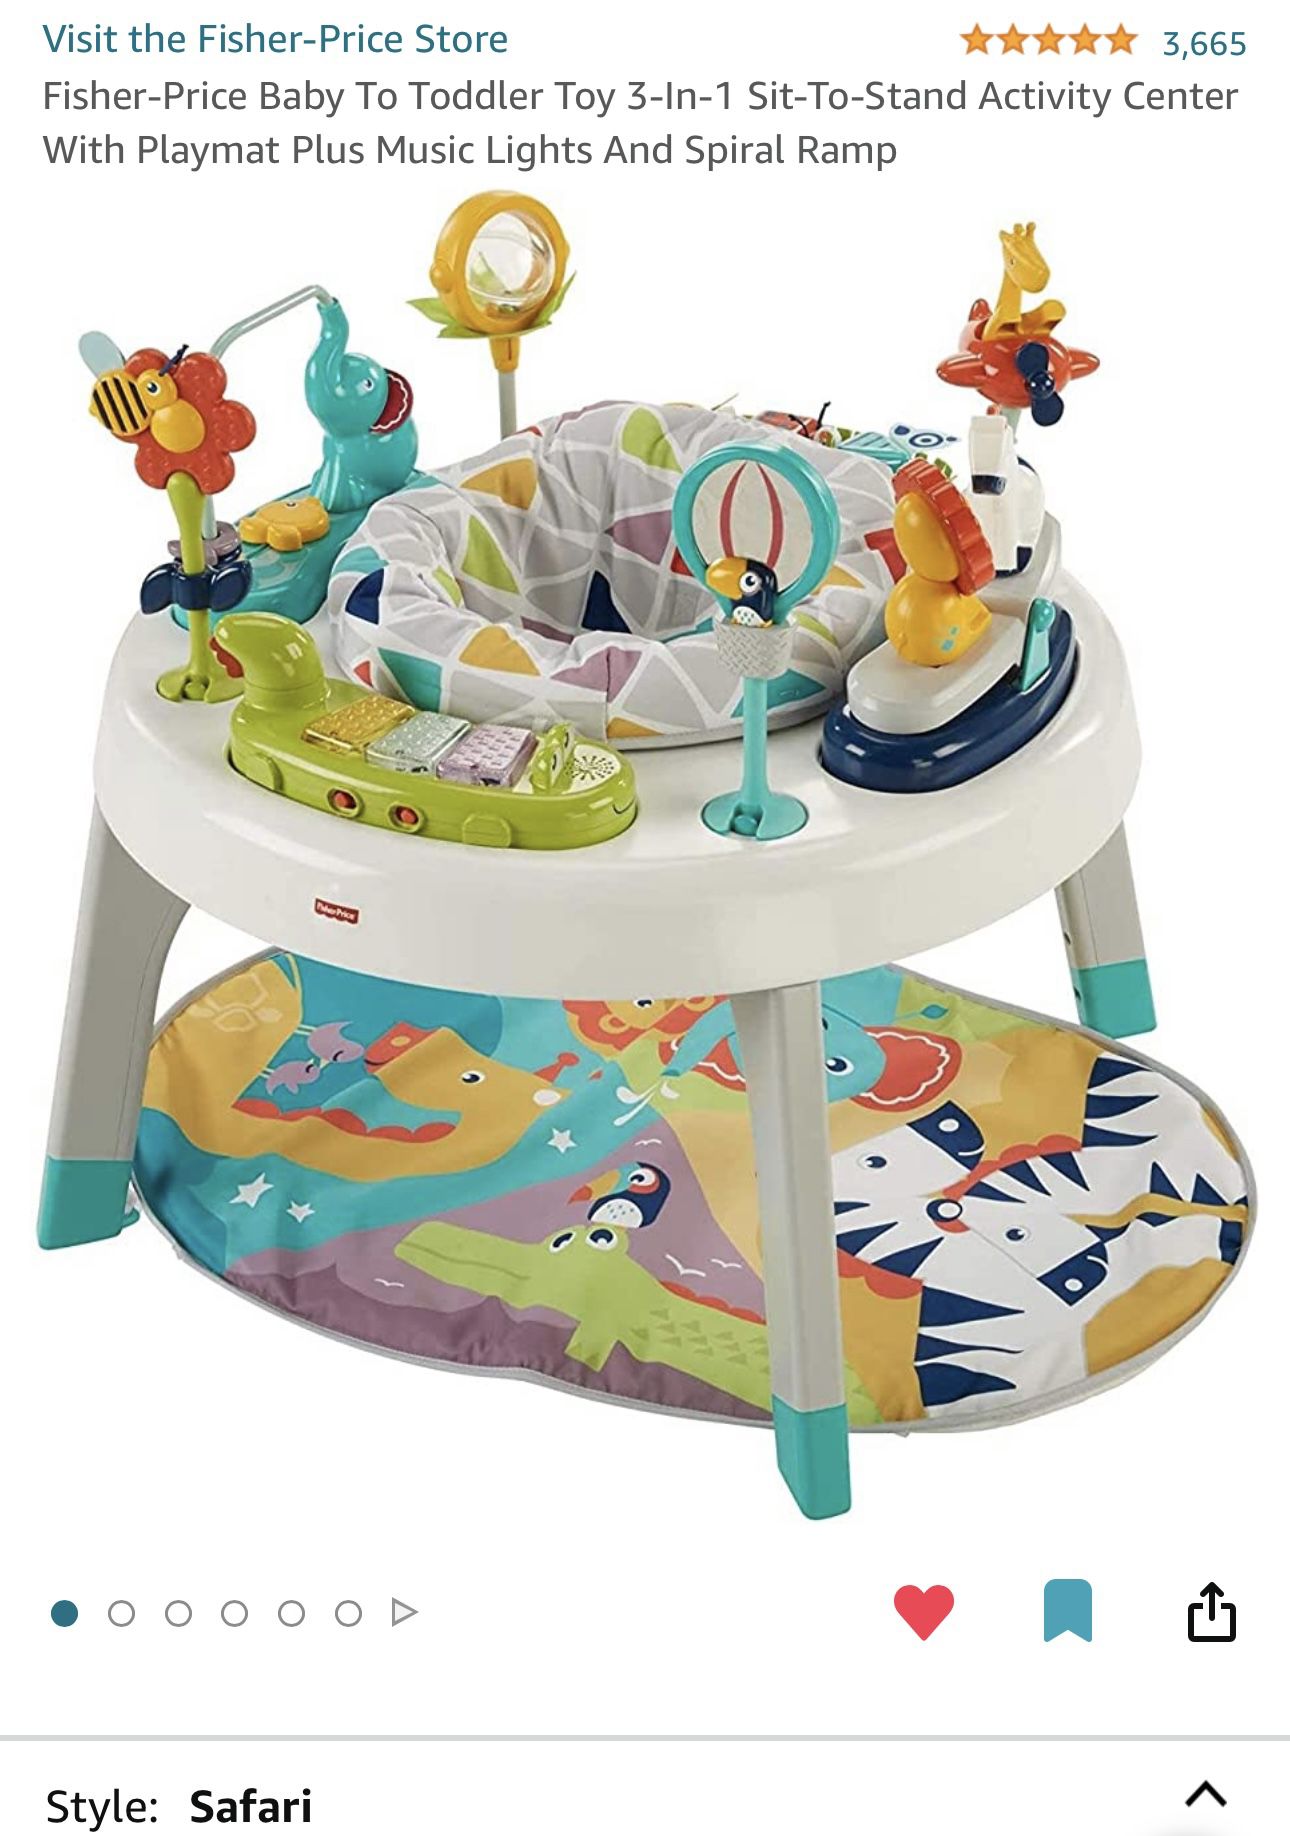 Fisher-Price Baby To Toddler Toy 3-In-1 Sit-To-Stand 